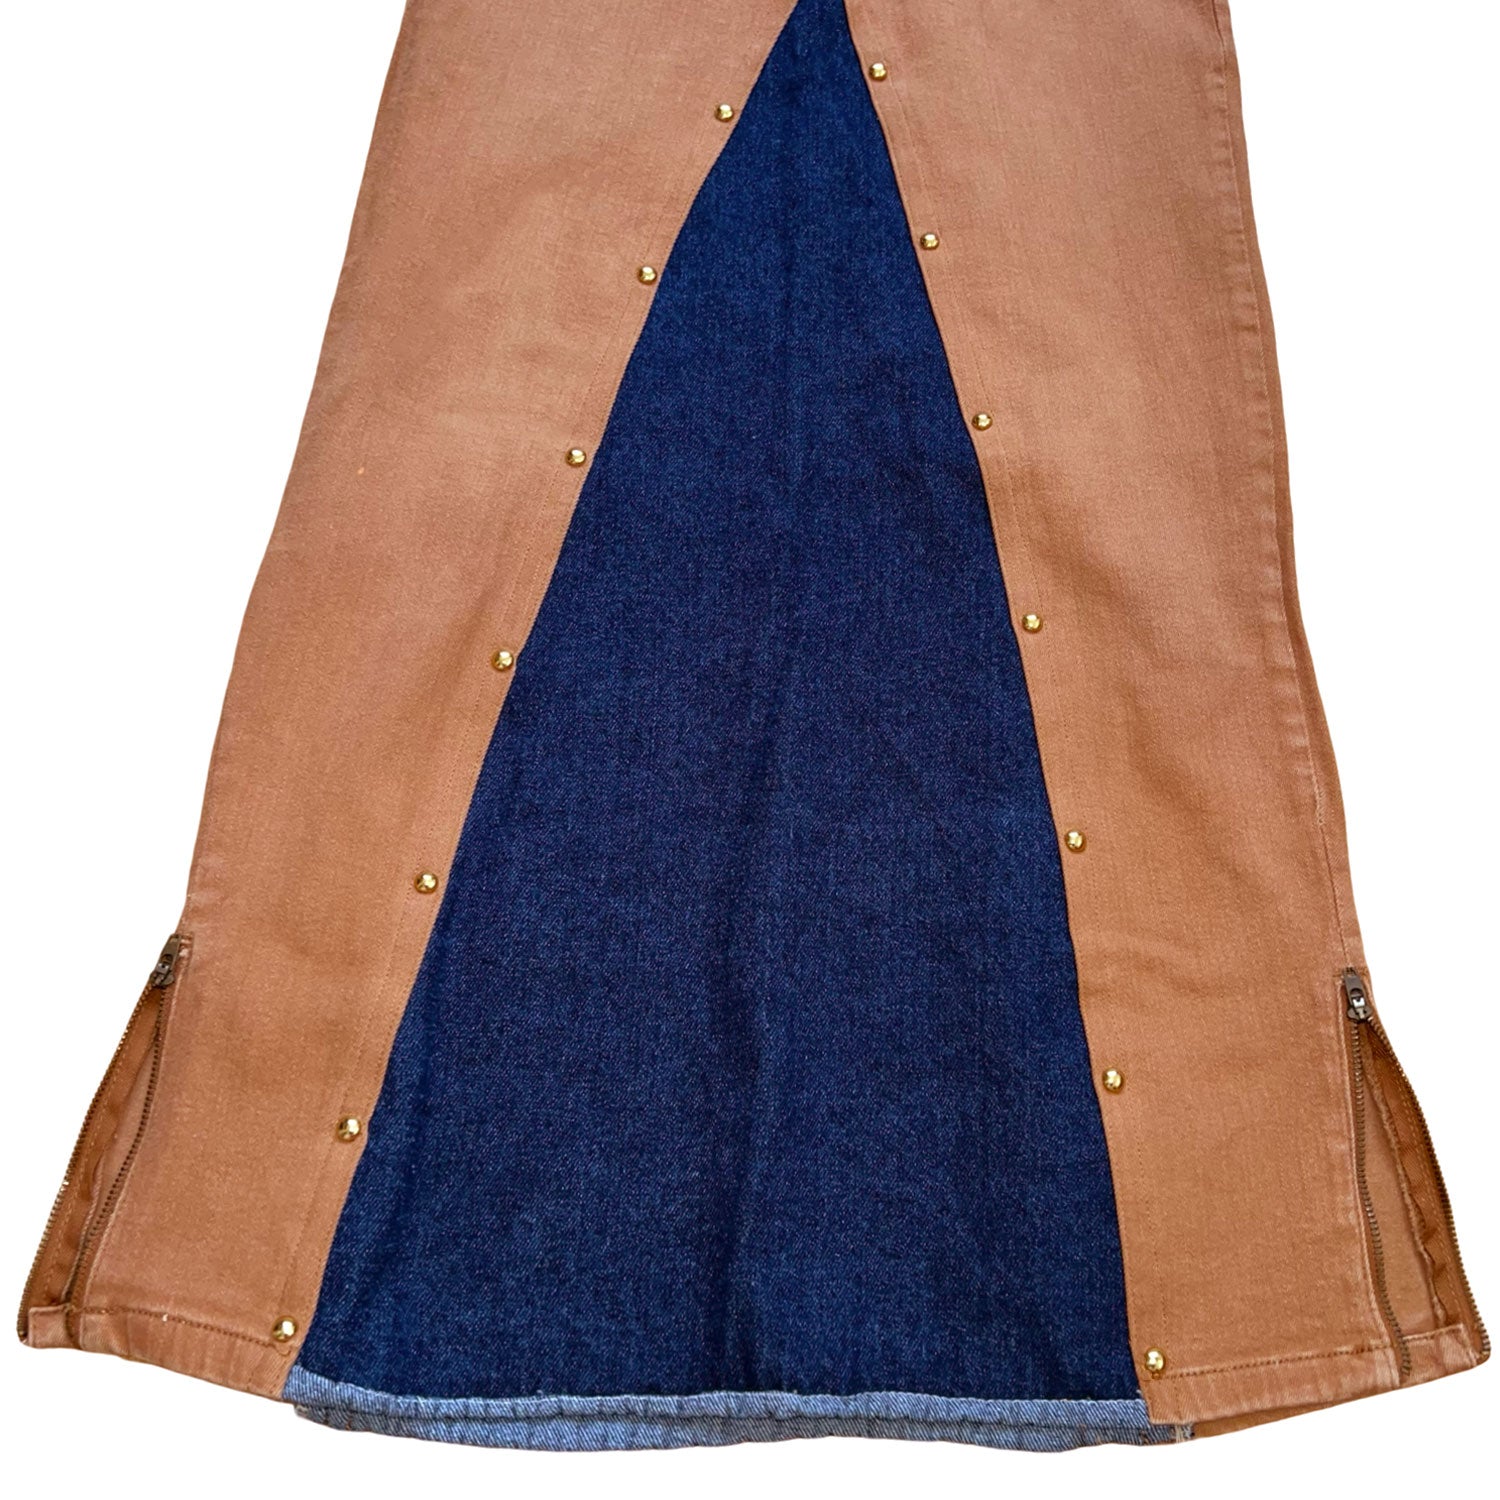 Maxi Denim Skirt in Brown and Blue